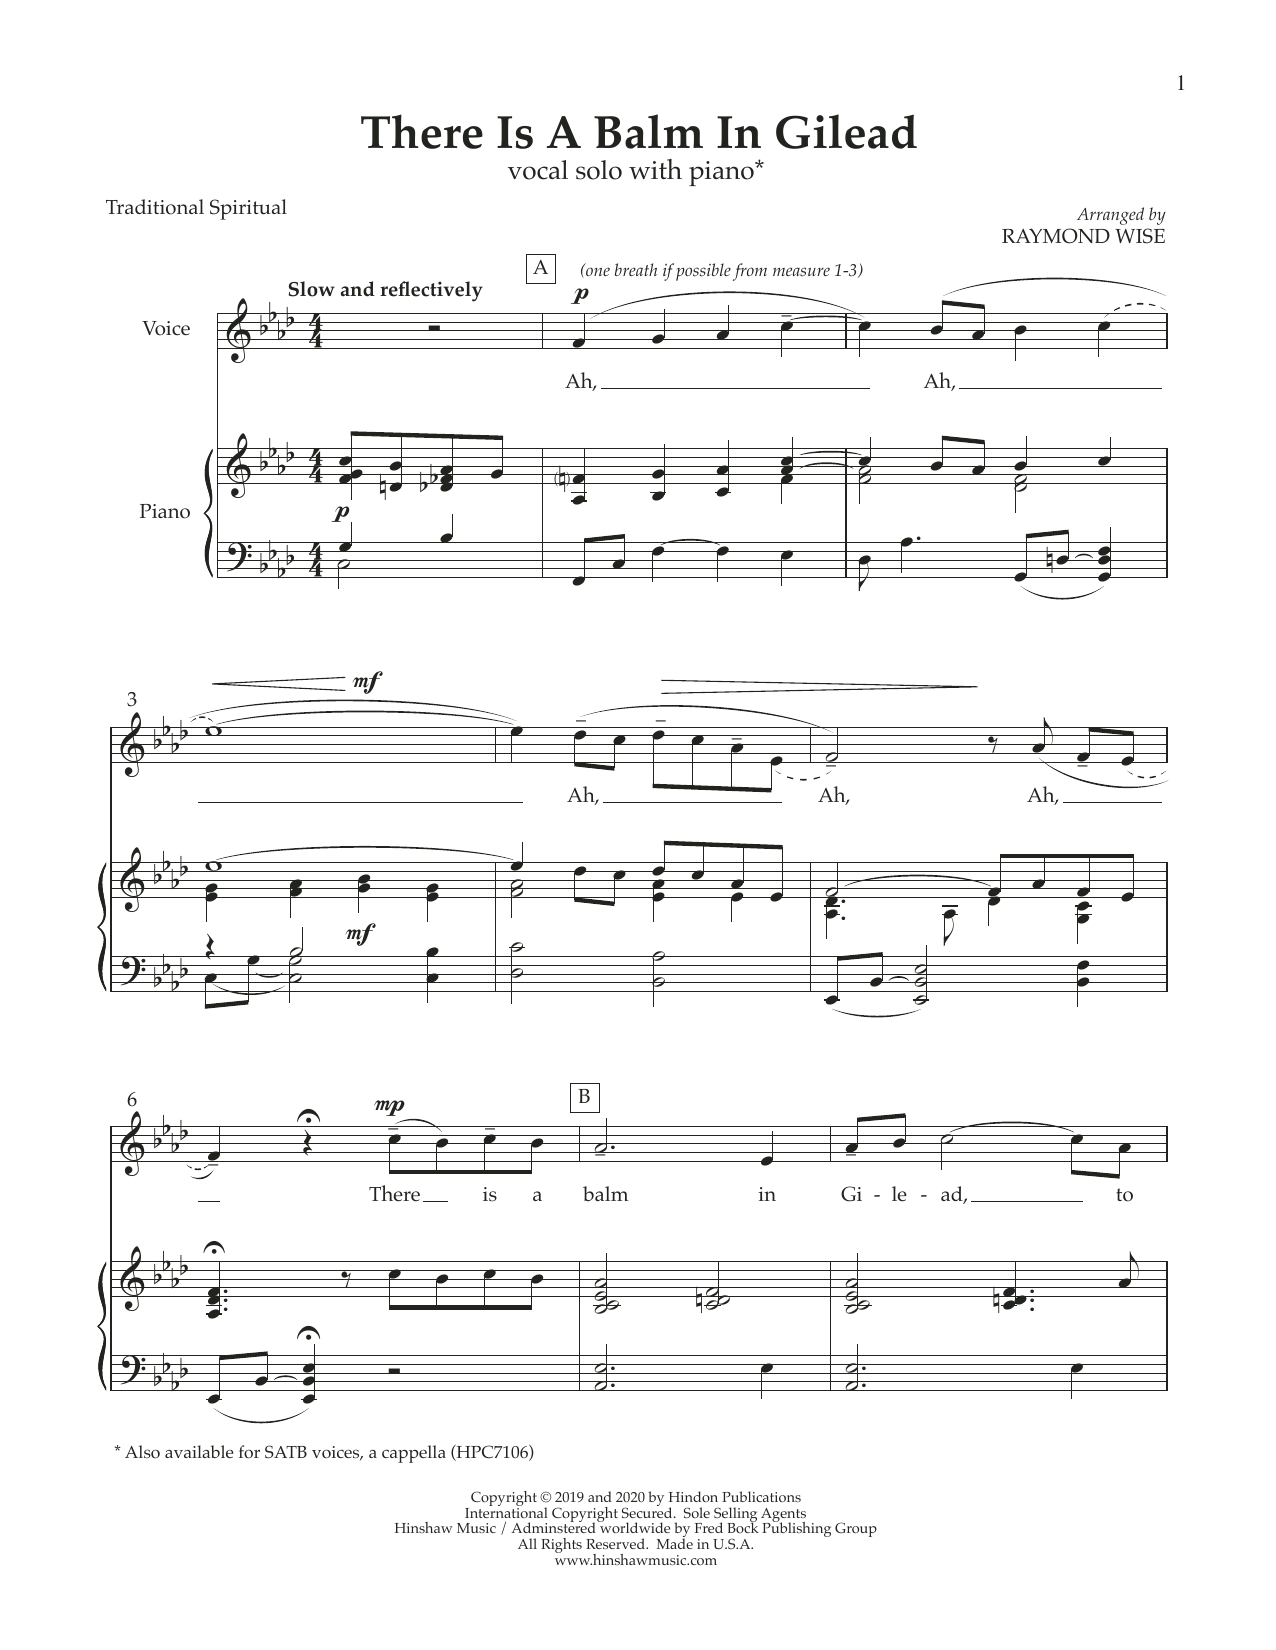 Download Raymond Wise There Is a Balm in Gilead Sheet Music